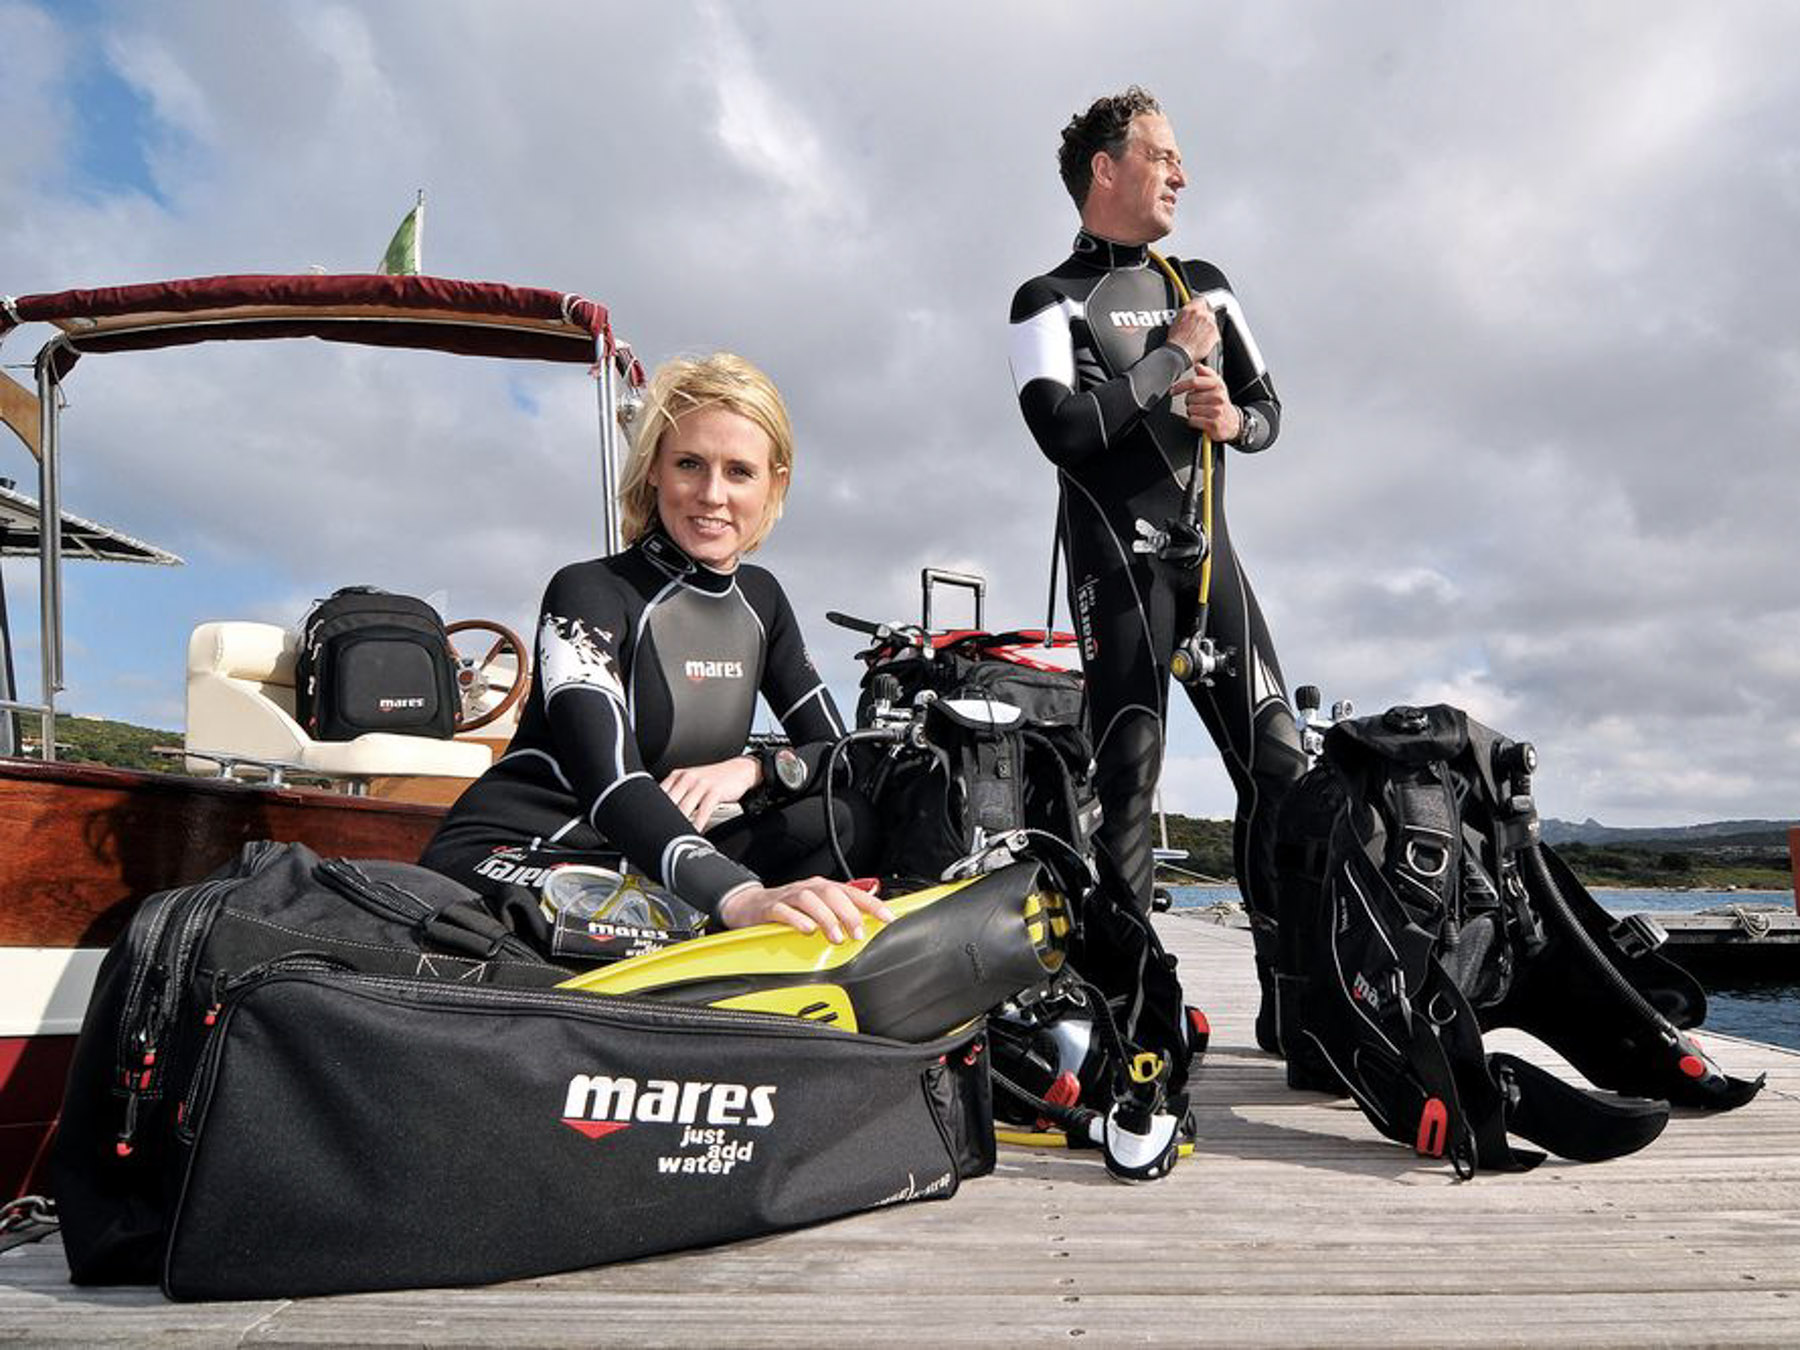 Scuba 2000 - Mares equipment and SSI courses in Cornwall and Leicester, UK